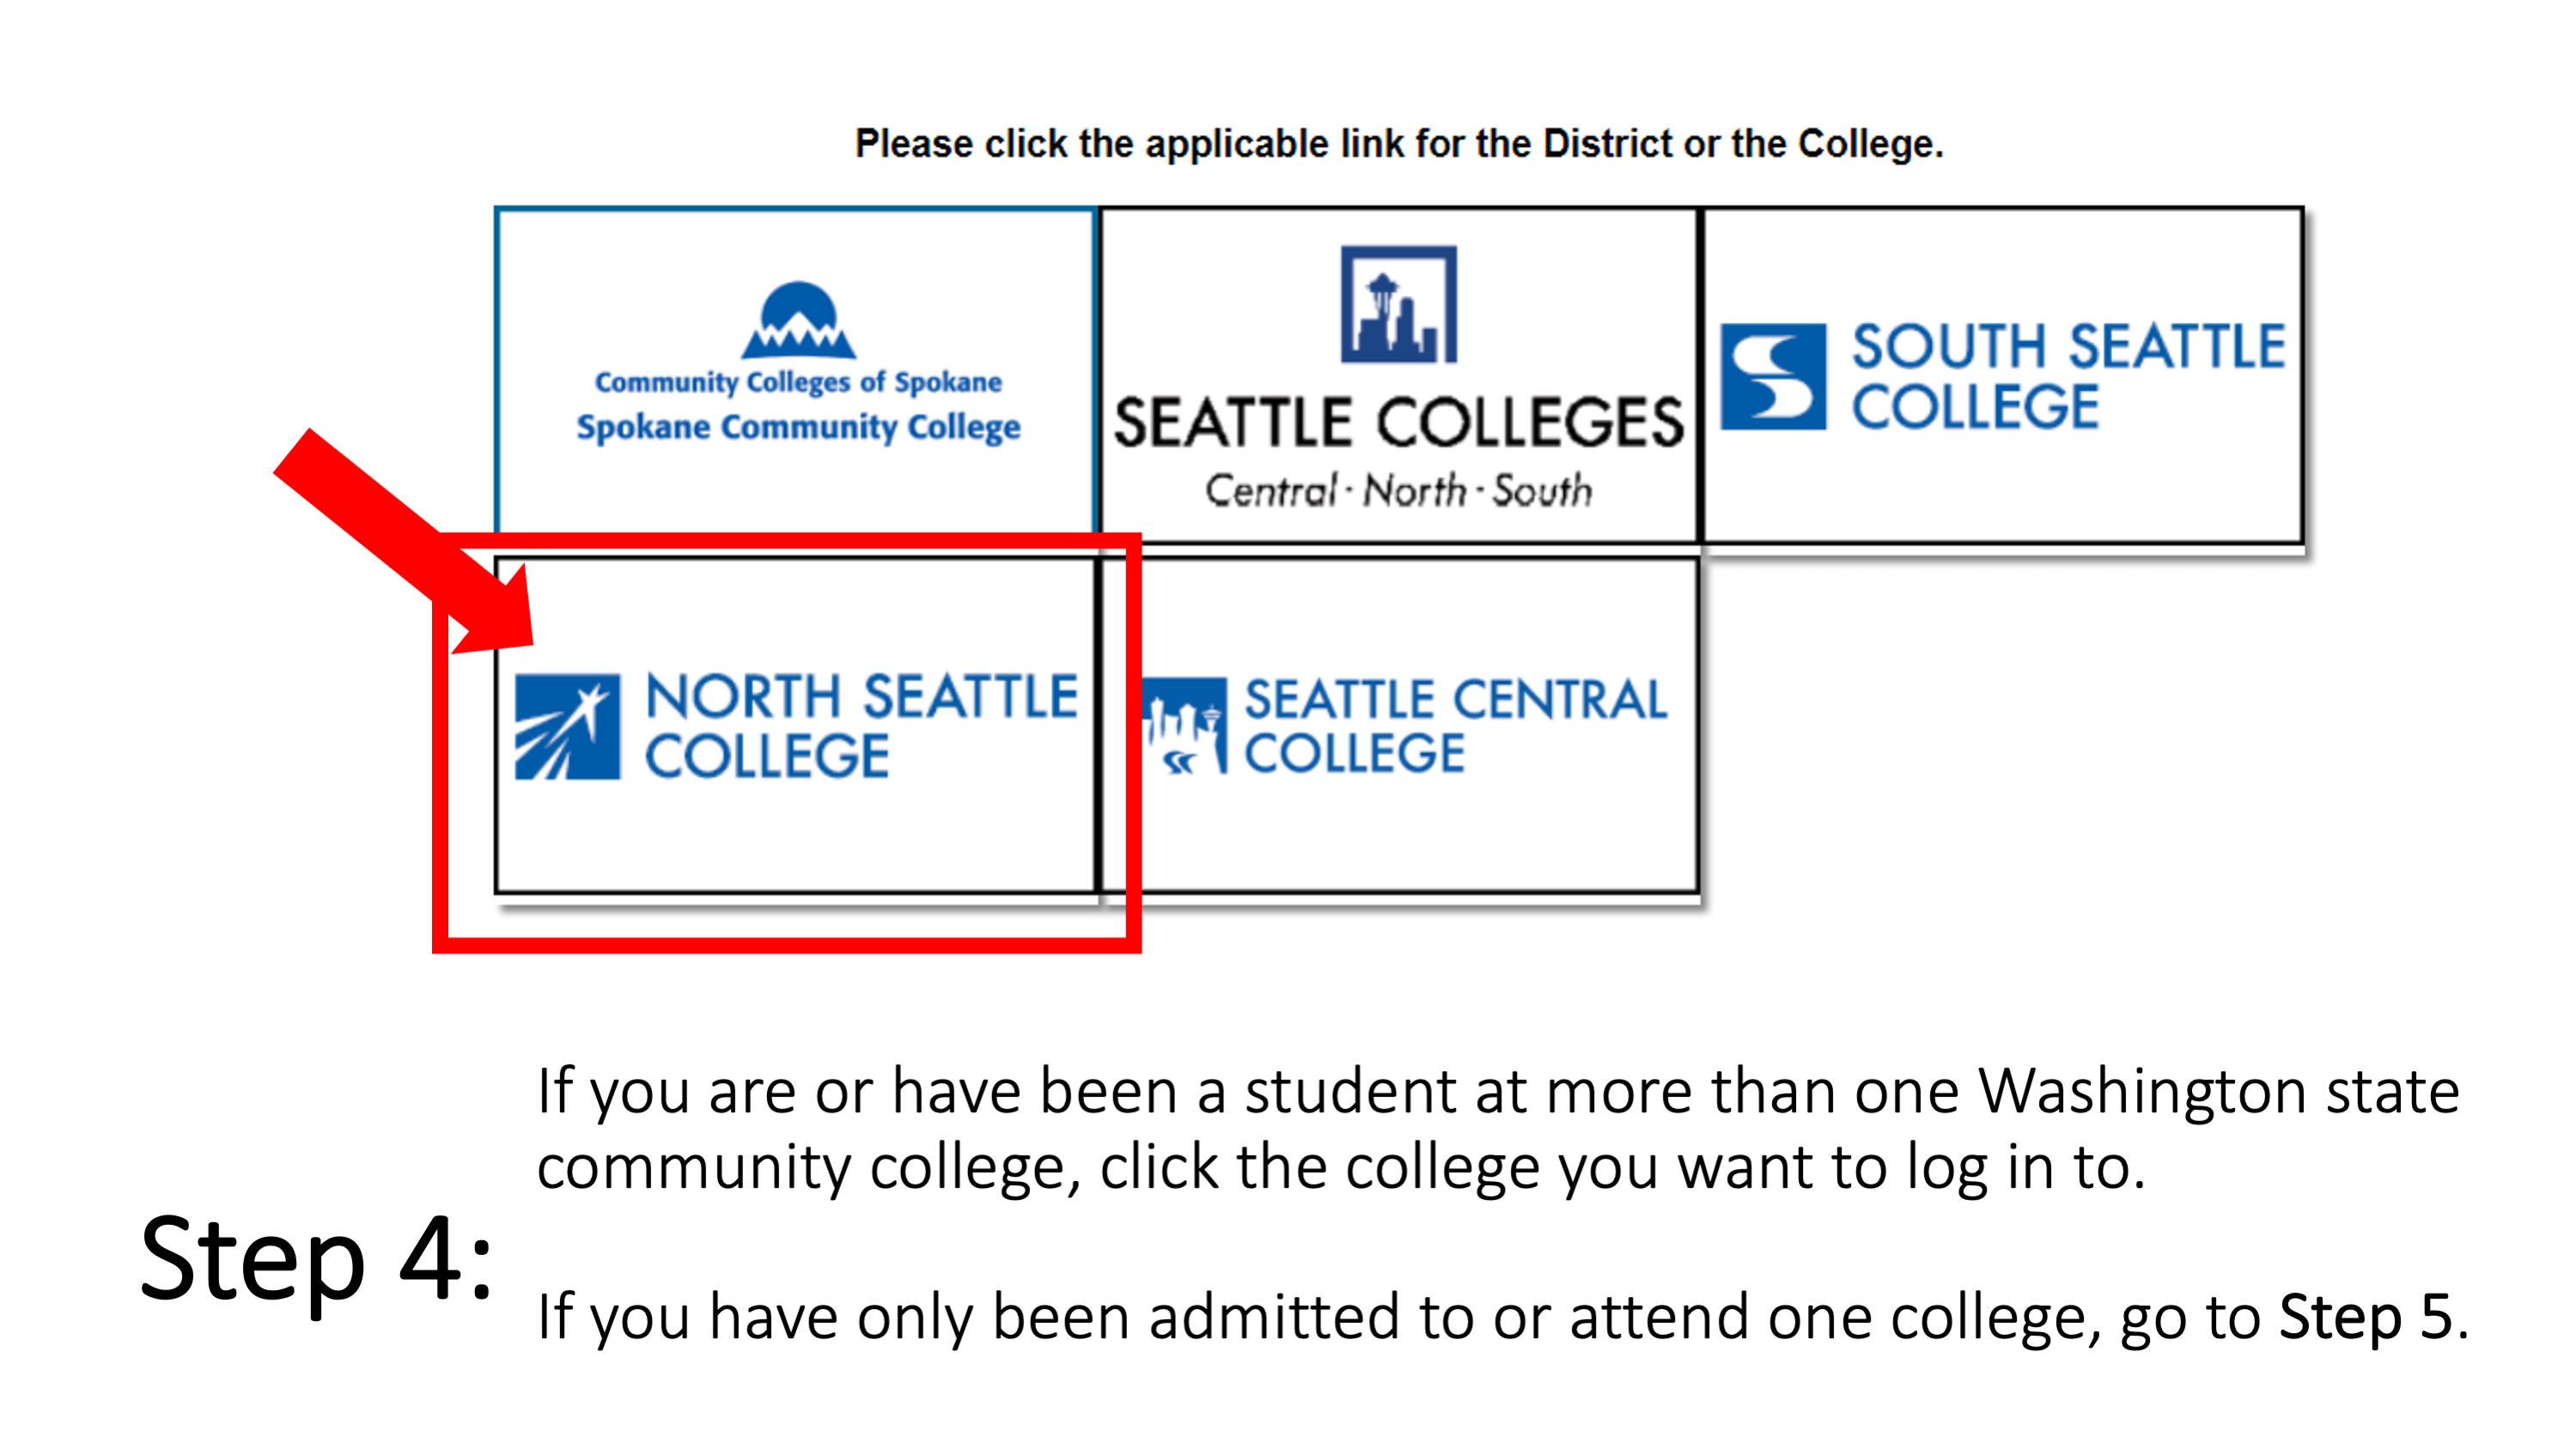 Slide 5 - Step 4: If you are or have been a student at more than one Washington state community college, click the college you want to log in to. If you have only been admitted to or attend one college, go to Step 5. 